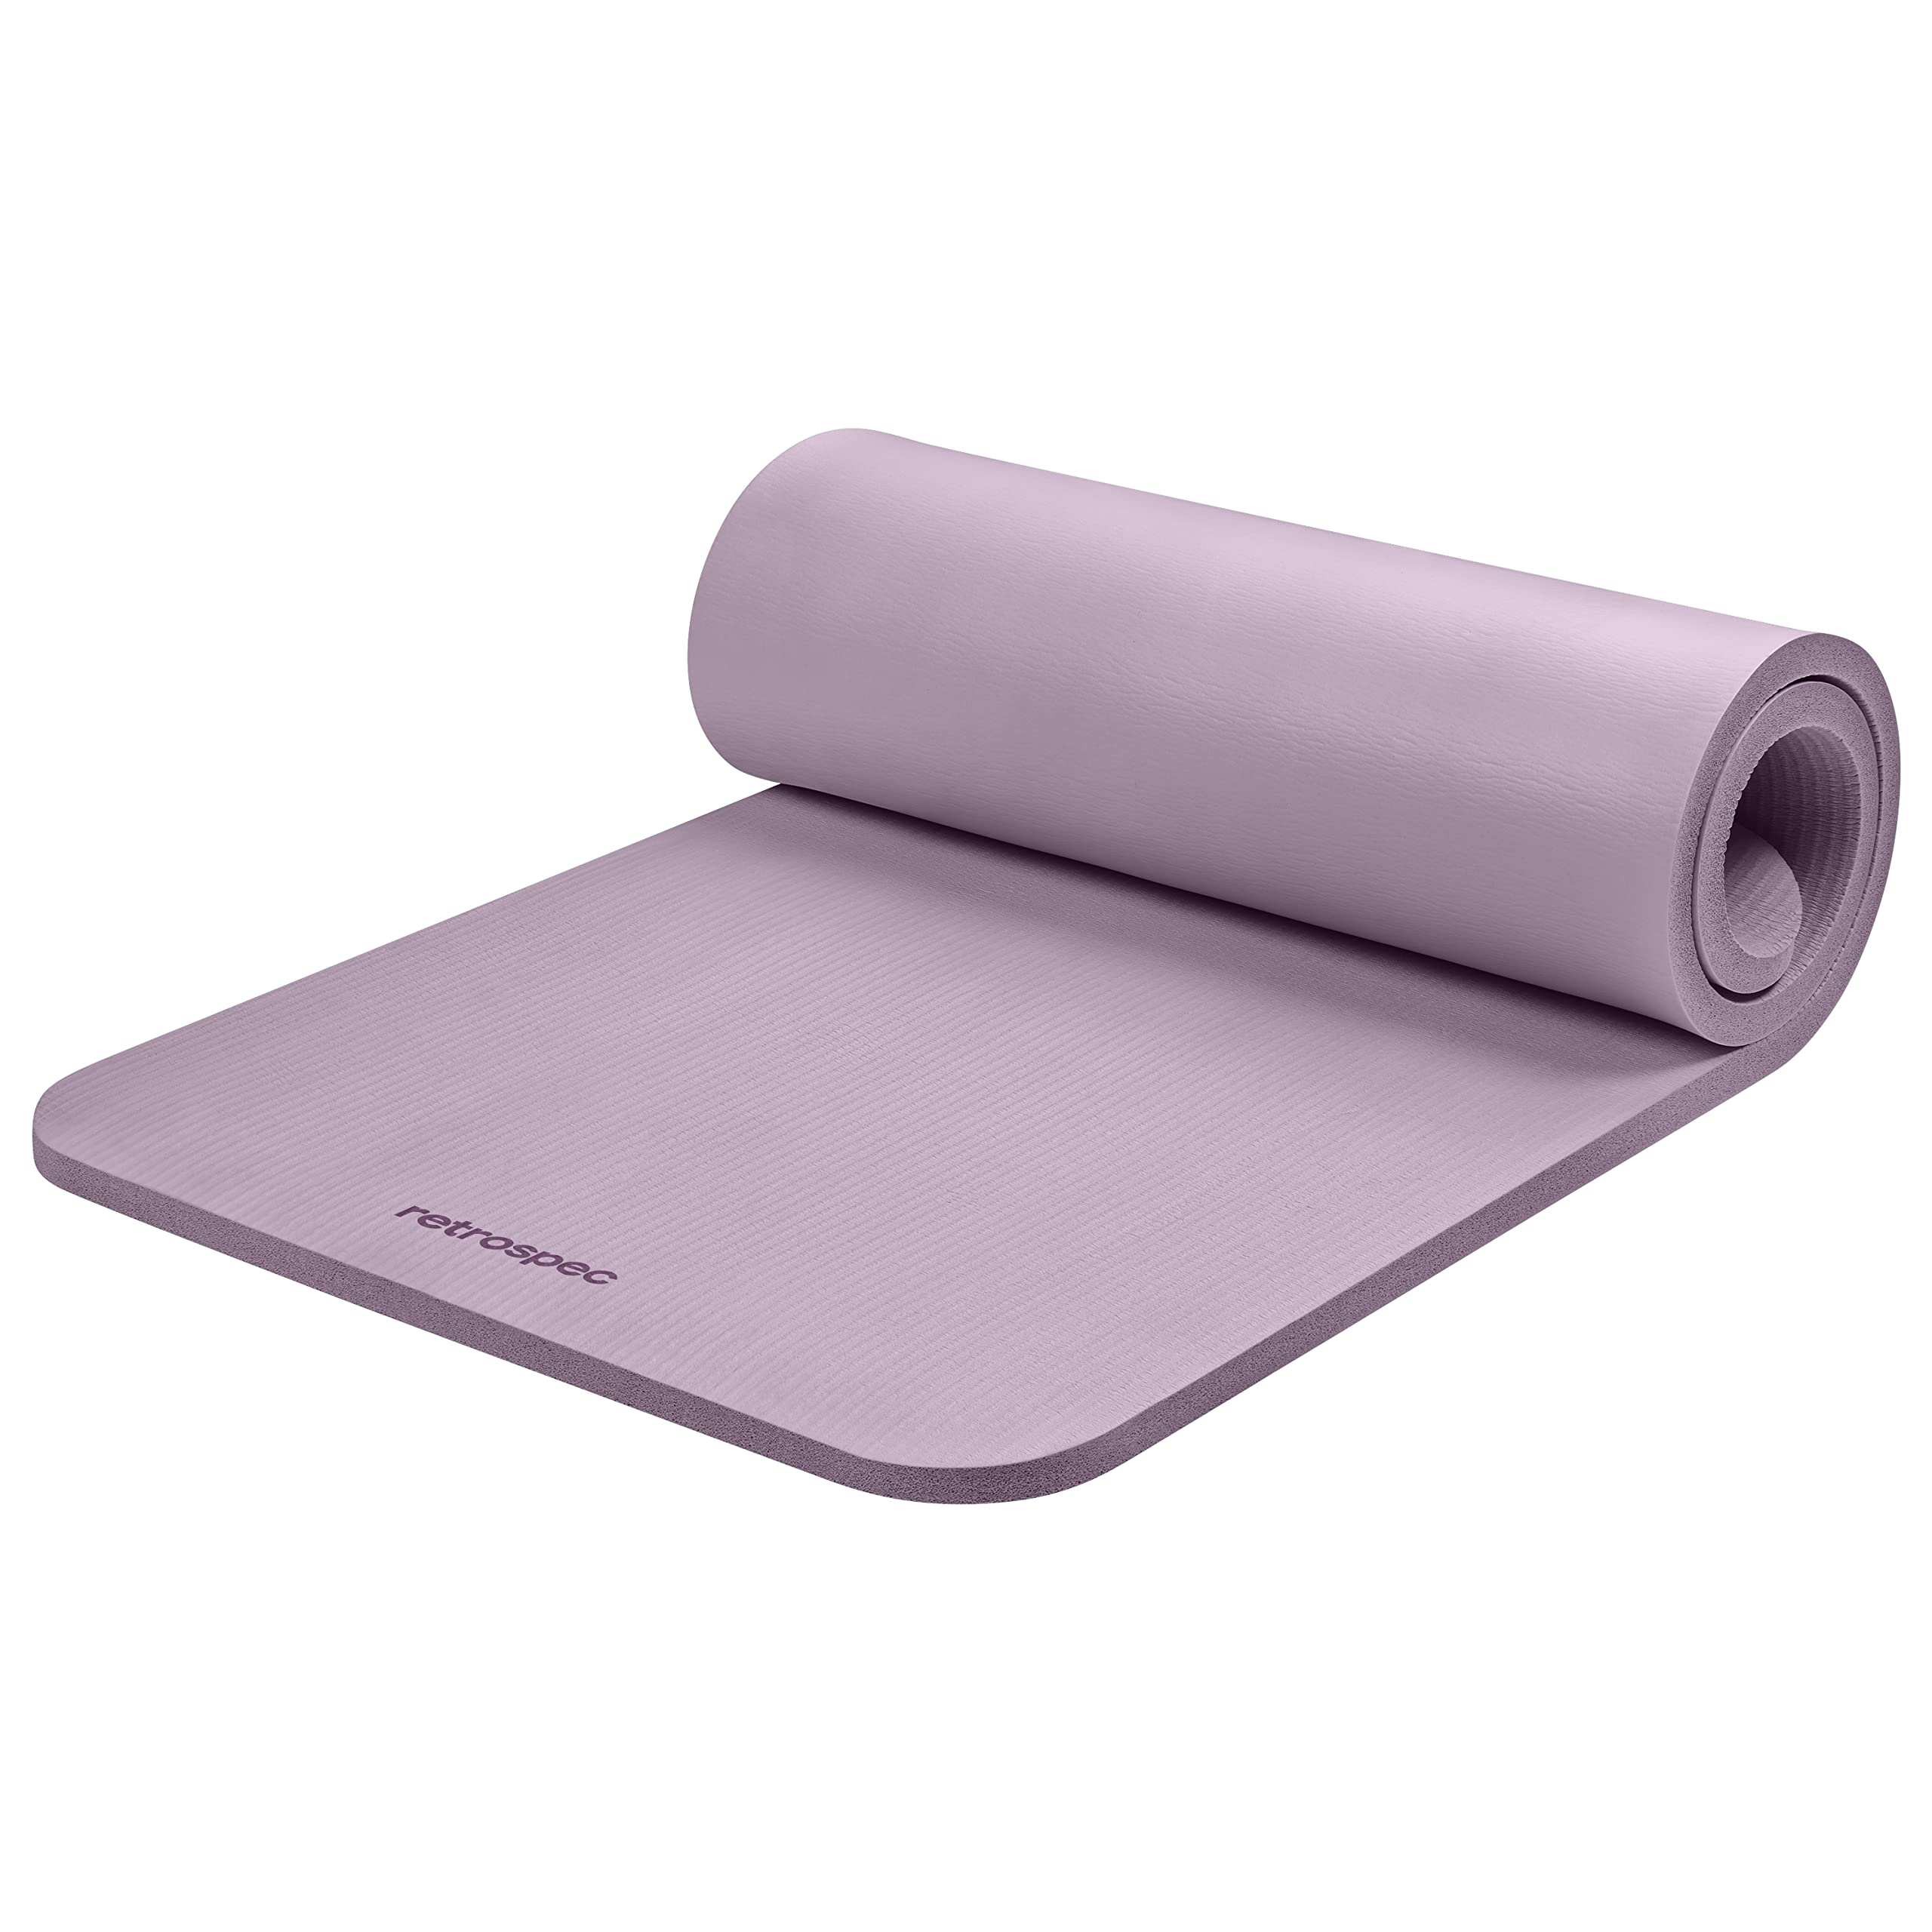 Retrospec Solana Yoga Mat 1 and 1/2 Thick with Nylon Strap for